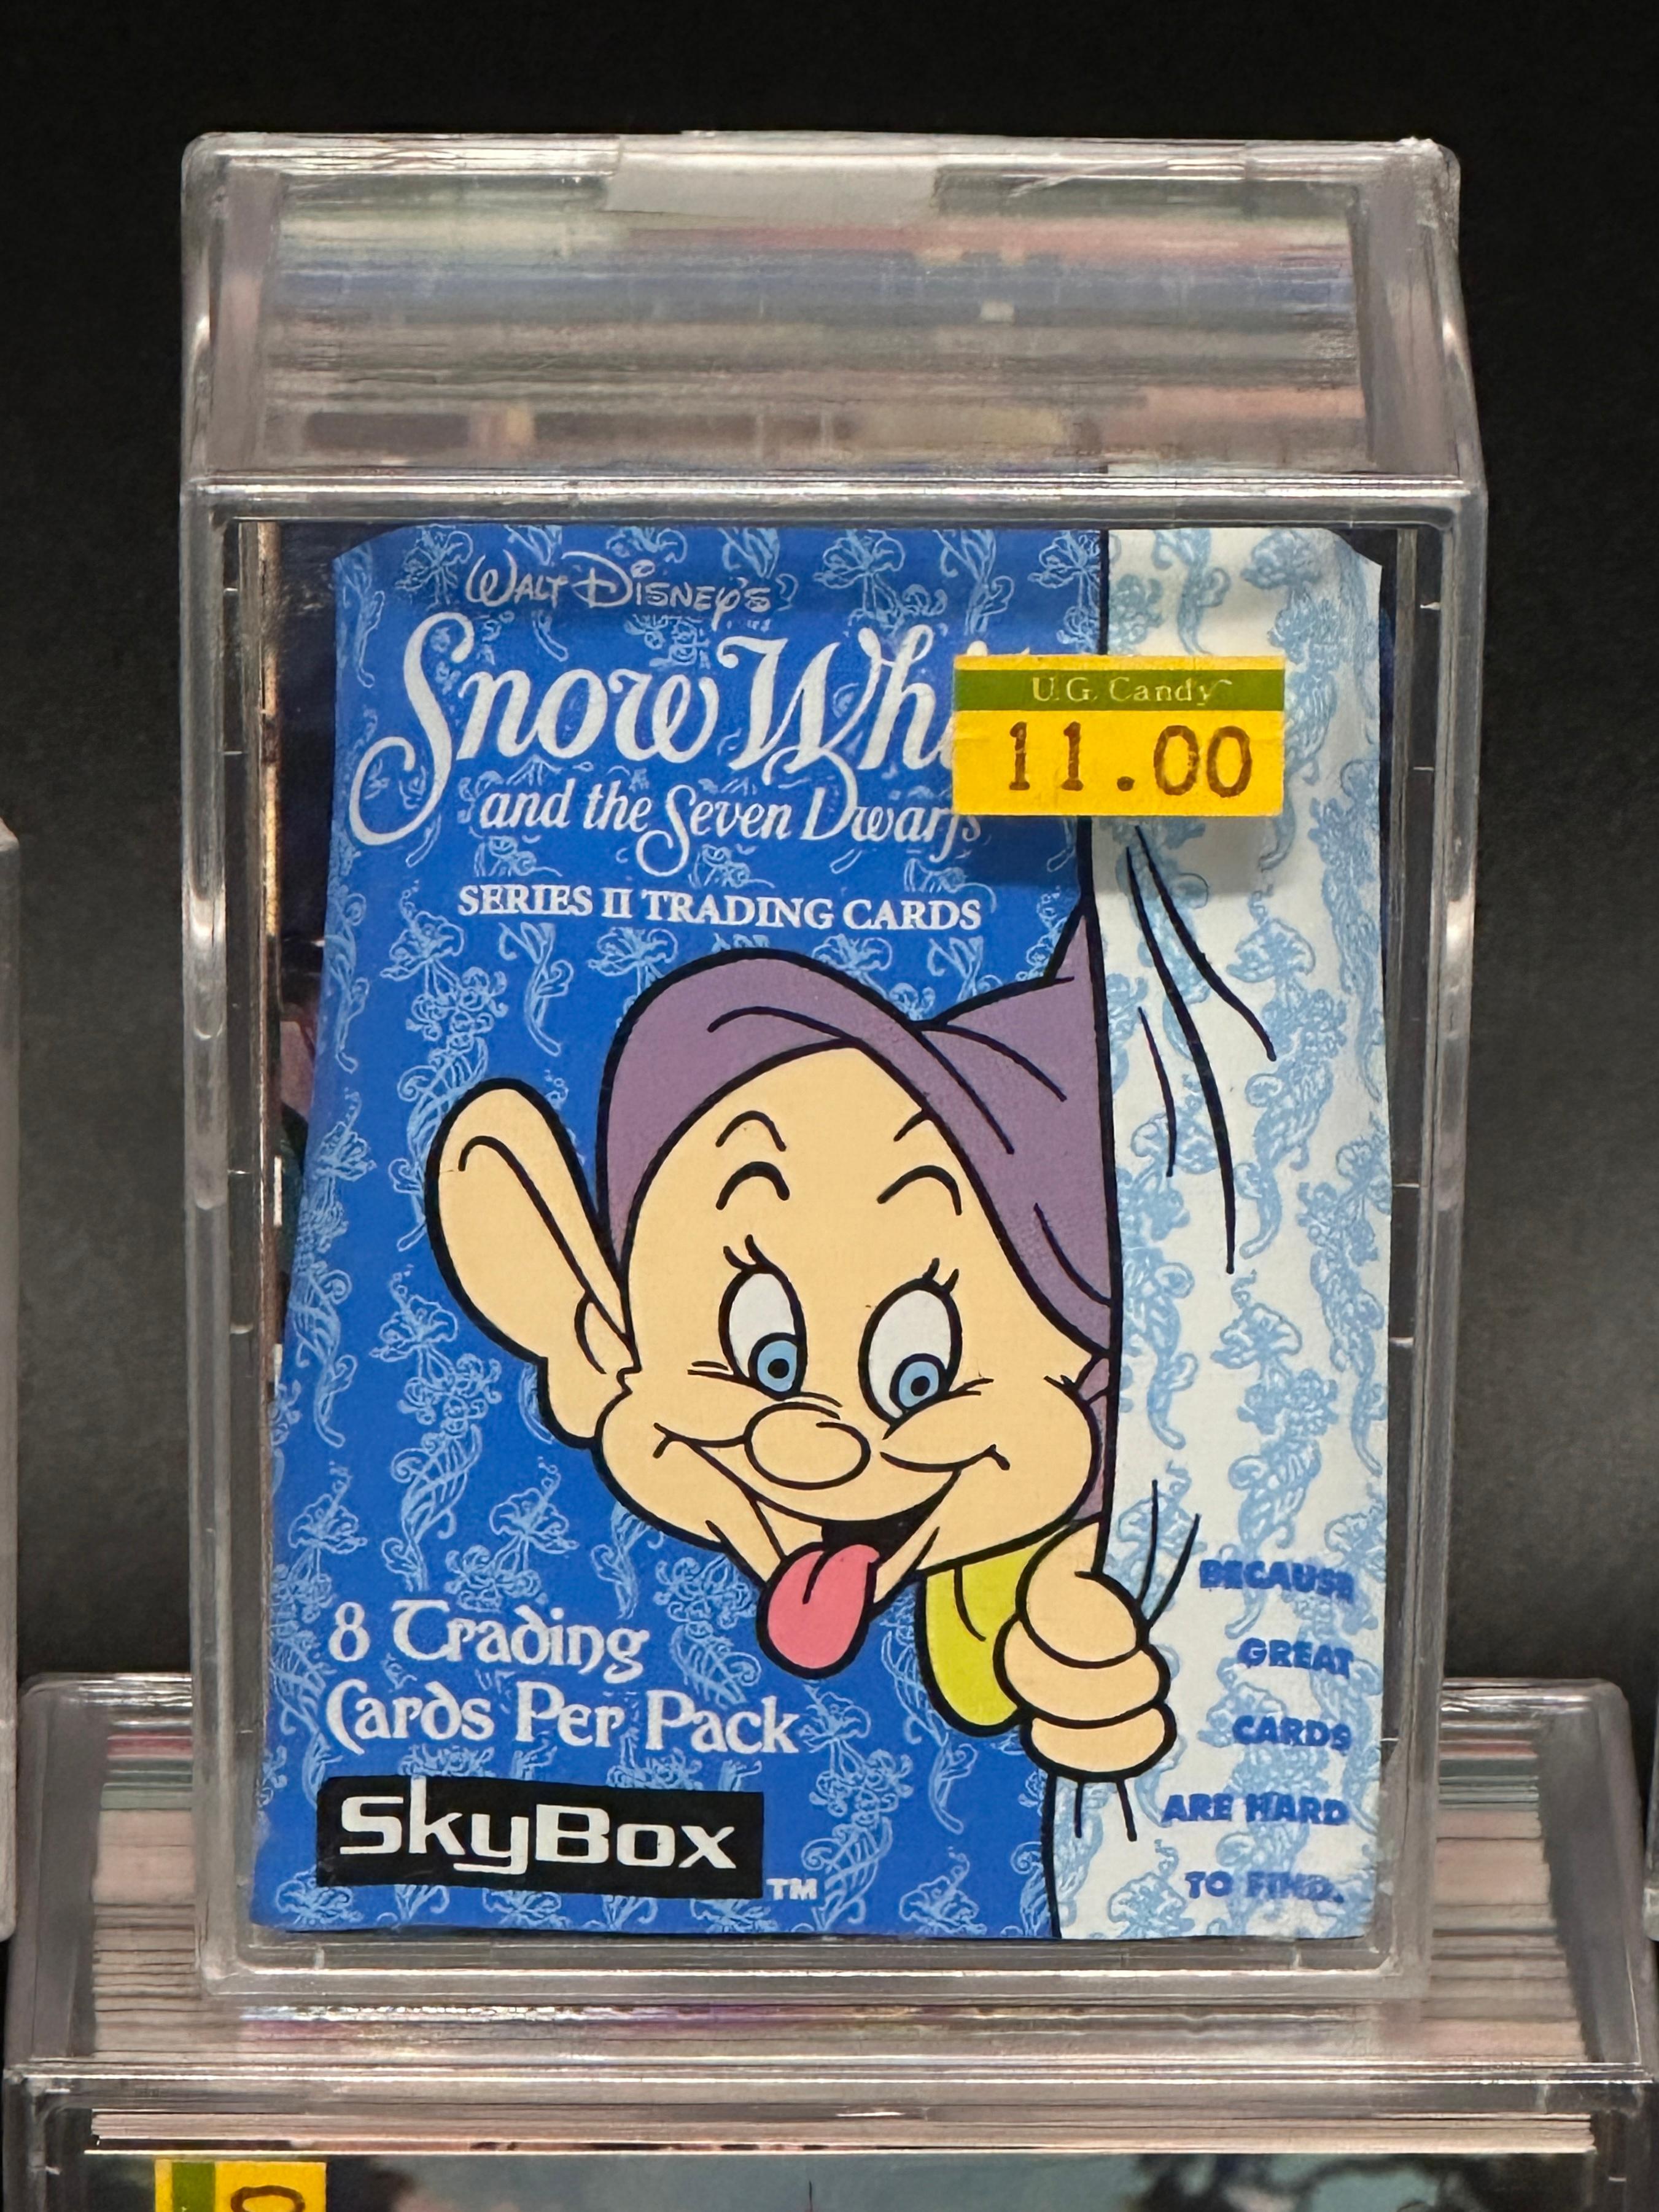 Snow White and the Seven Dwarfs Card Collection